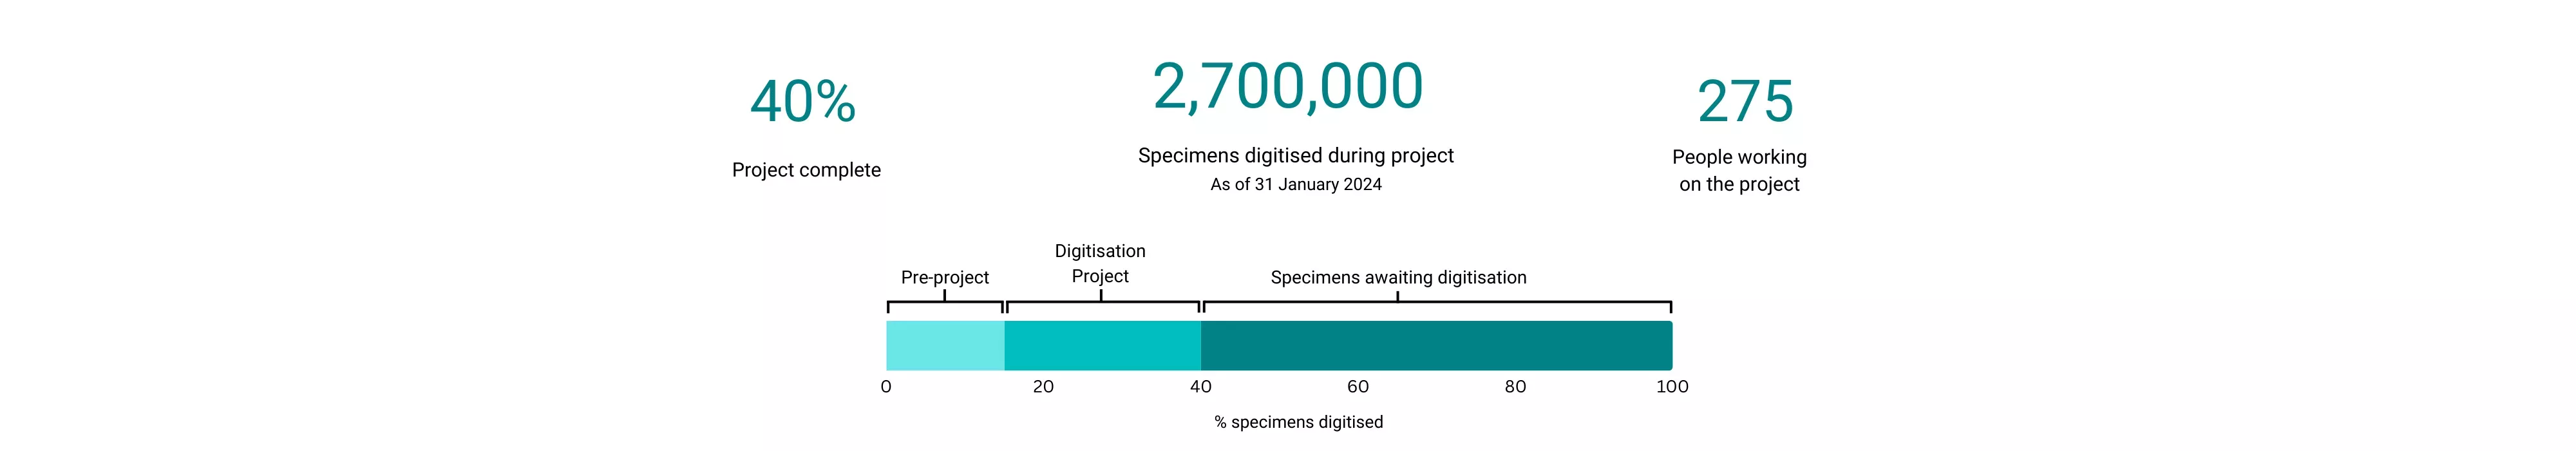 Graphic showing the Digitisation Project numbers to date